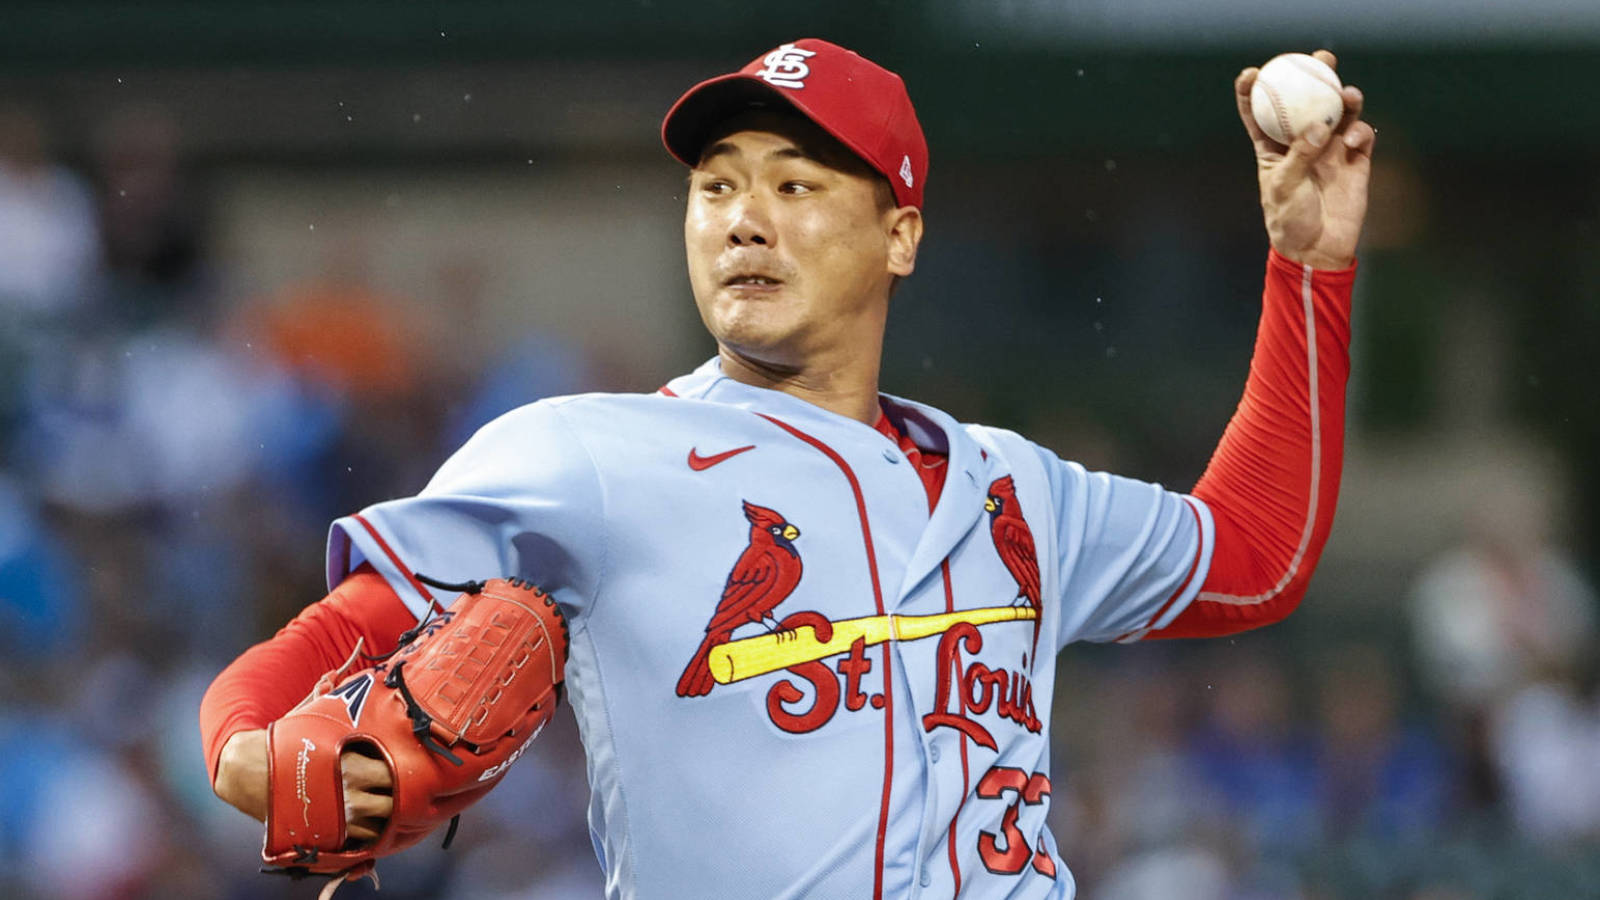 Cardinals lefty Kwang-hyun Kim activated off IL, will pitch out of bullpen